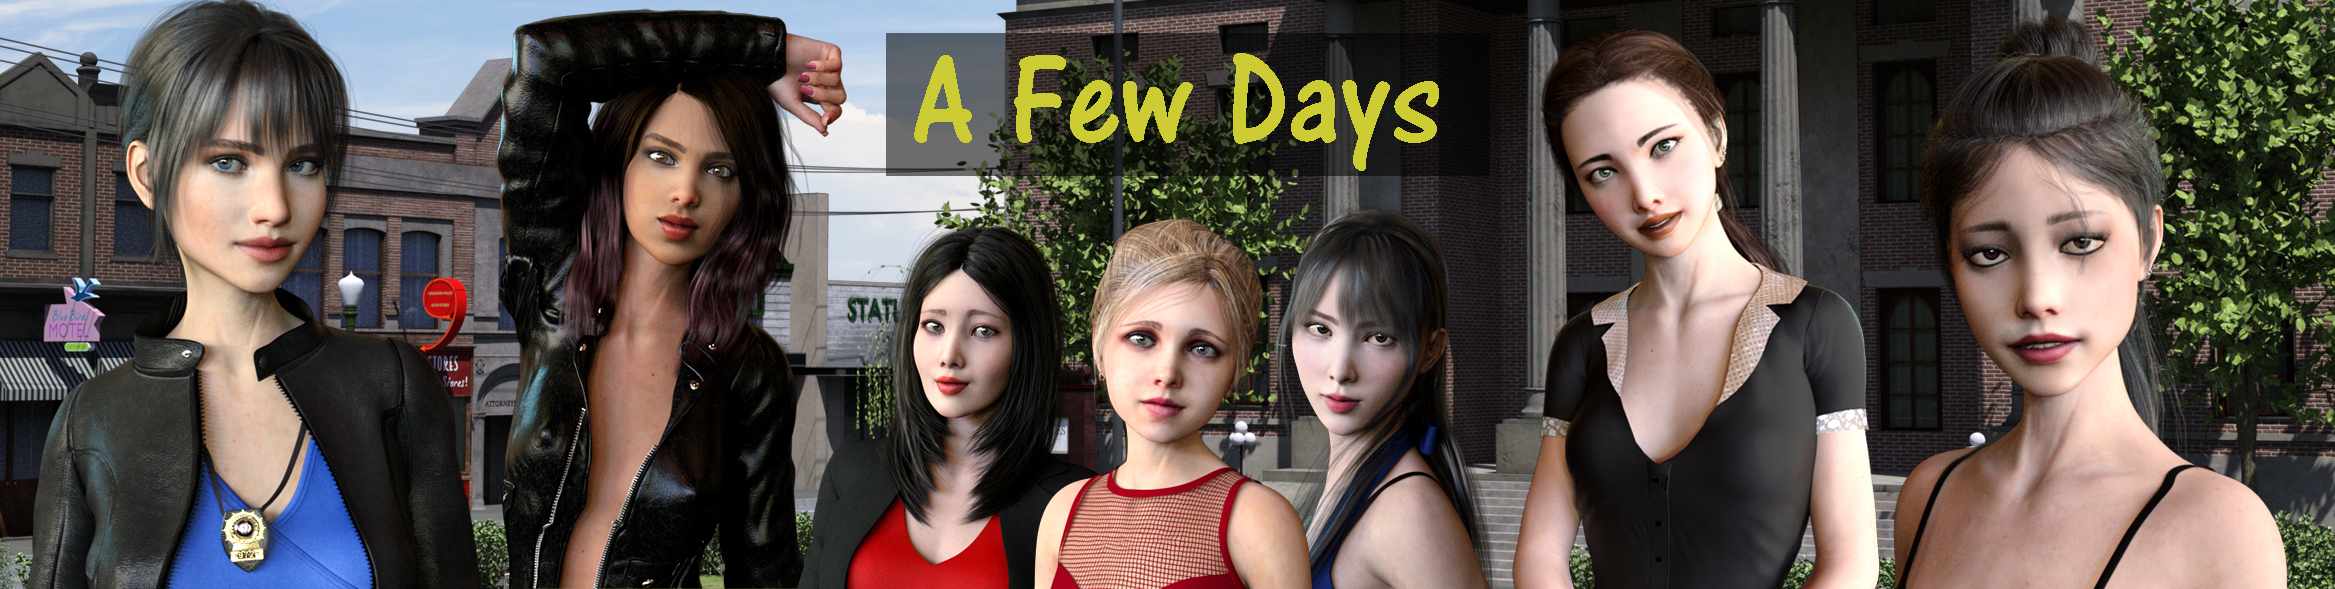 A Few Days [Mickydoo] Adult xxx Game Download